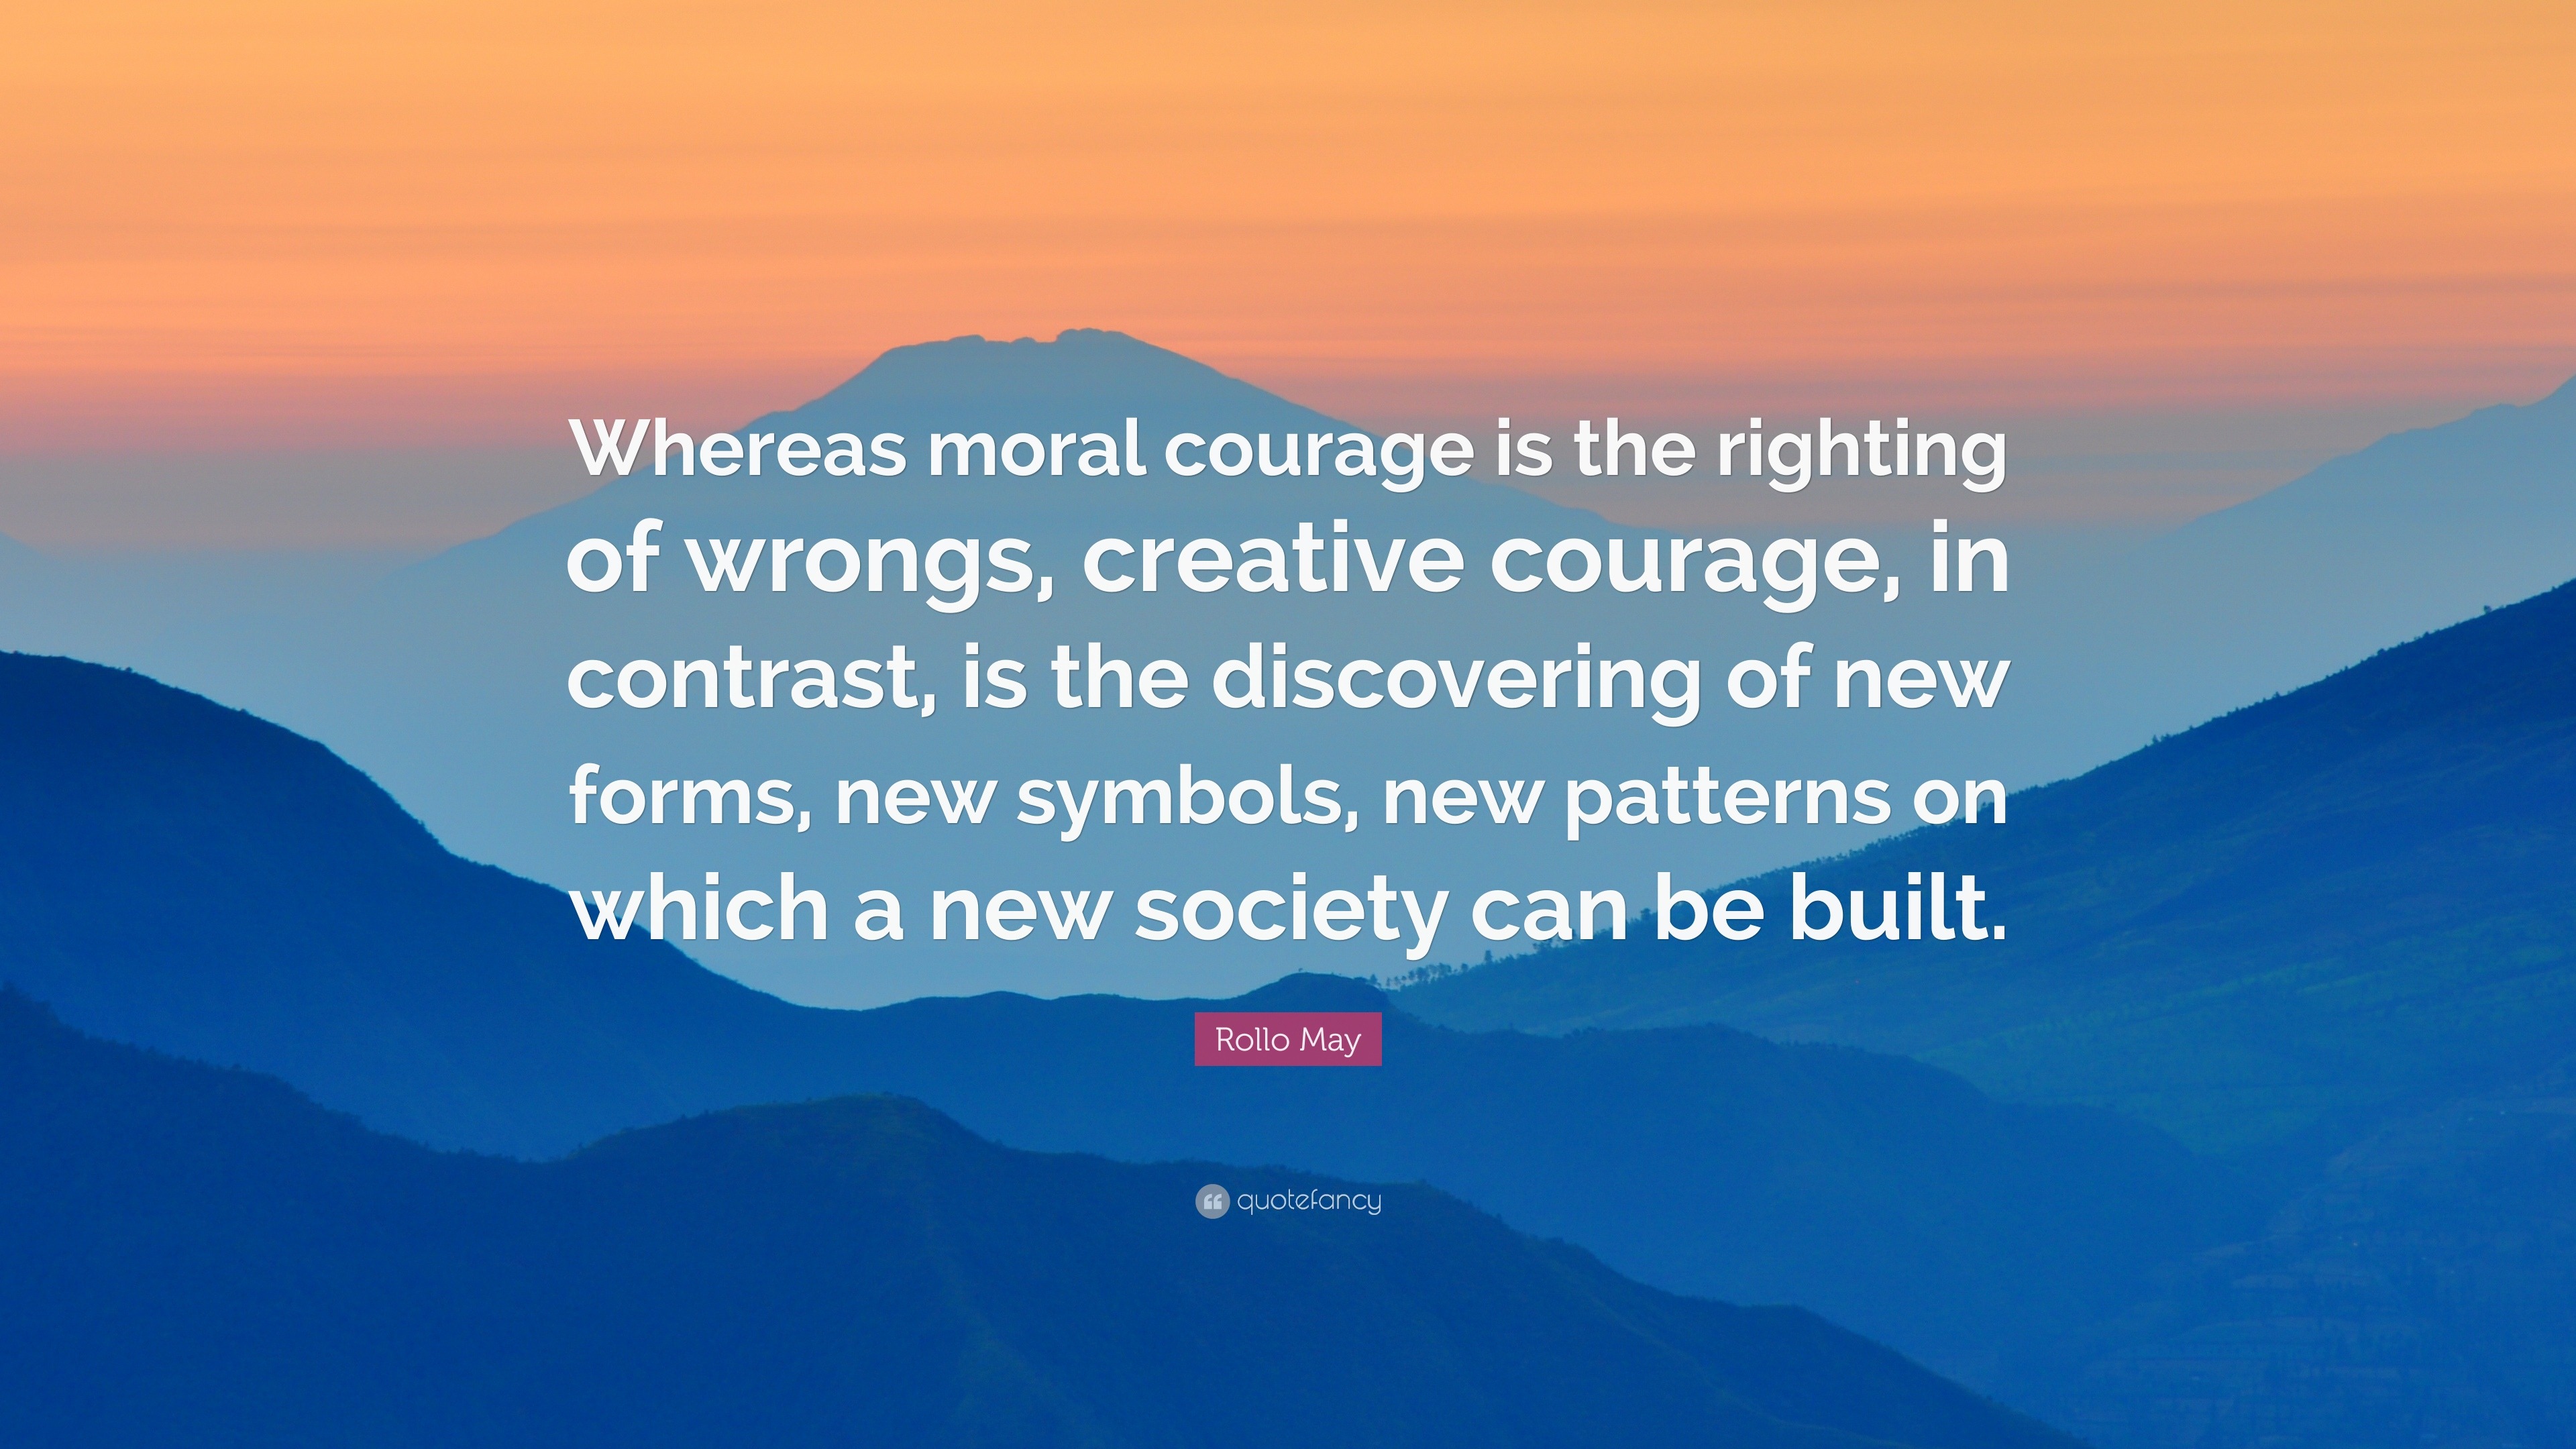 Rollo May Quote: “Whereas moral courage is the righting of wrongs, creative  courage, in contrast, is the discovering of new forms, new sym”